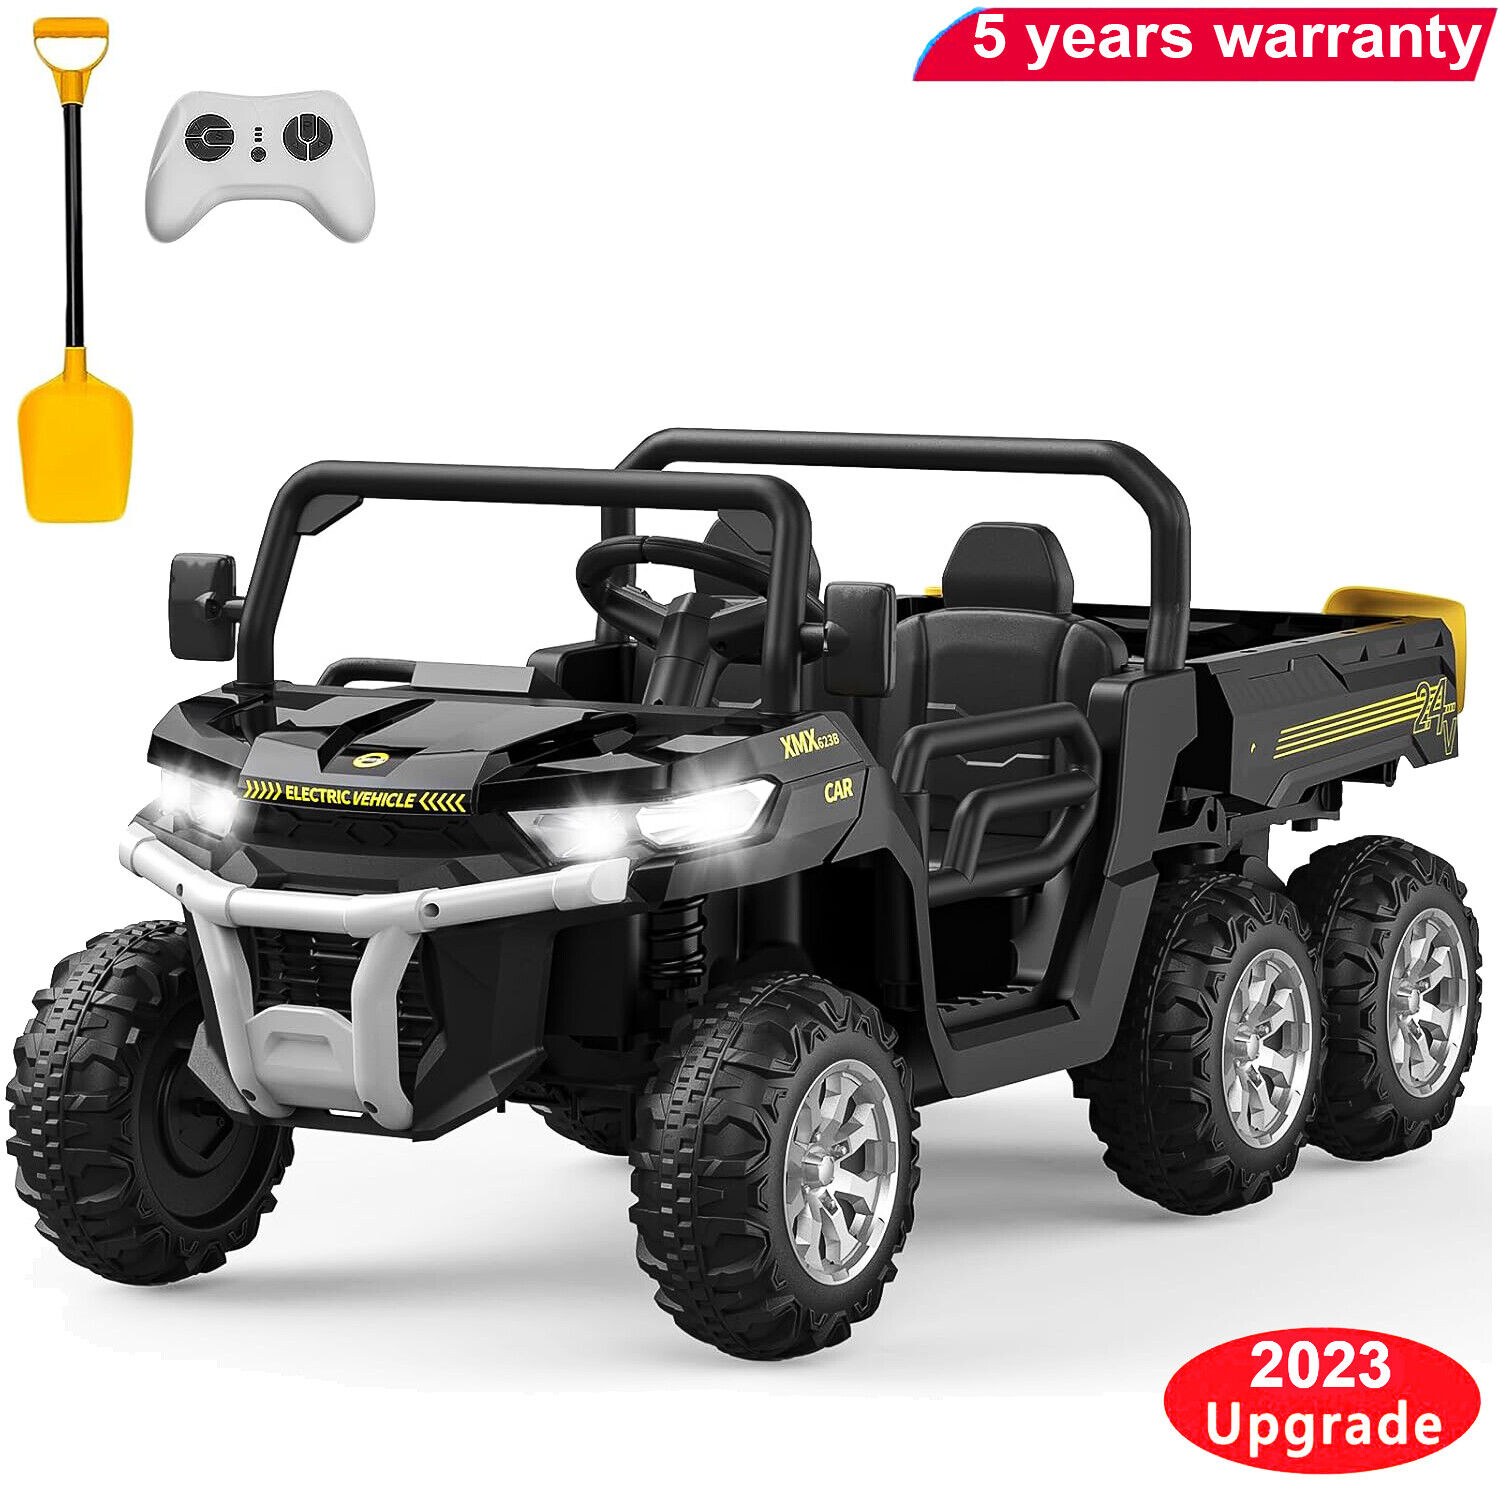 24V Kids Ride On Car UTV Truck with Dump Bed 6 Wheel 2-Speed Remote Control Gift